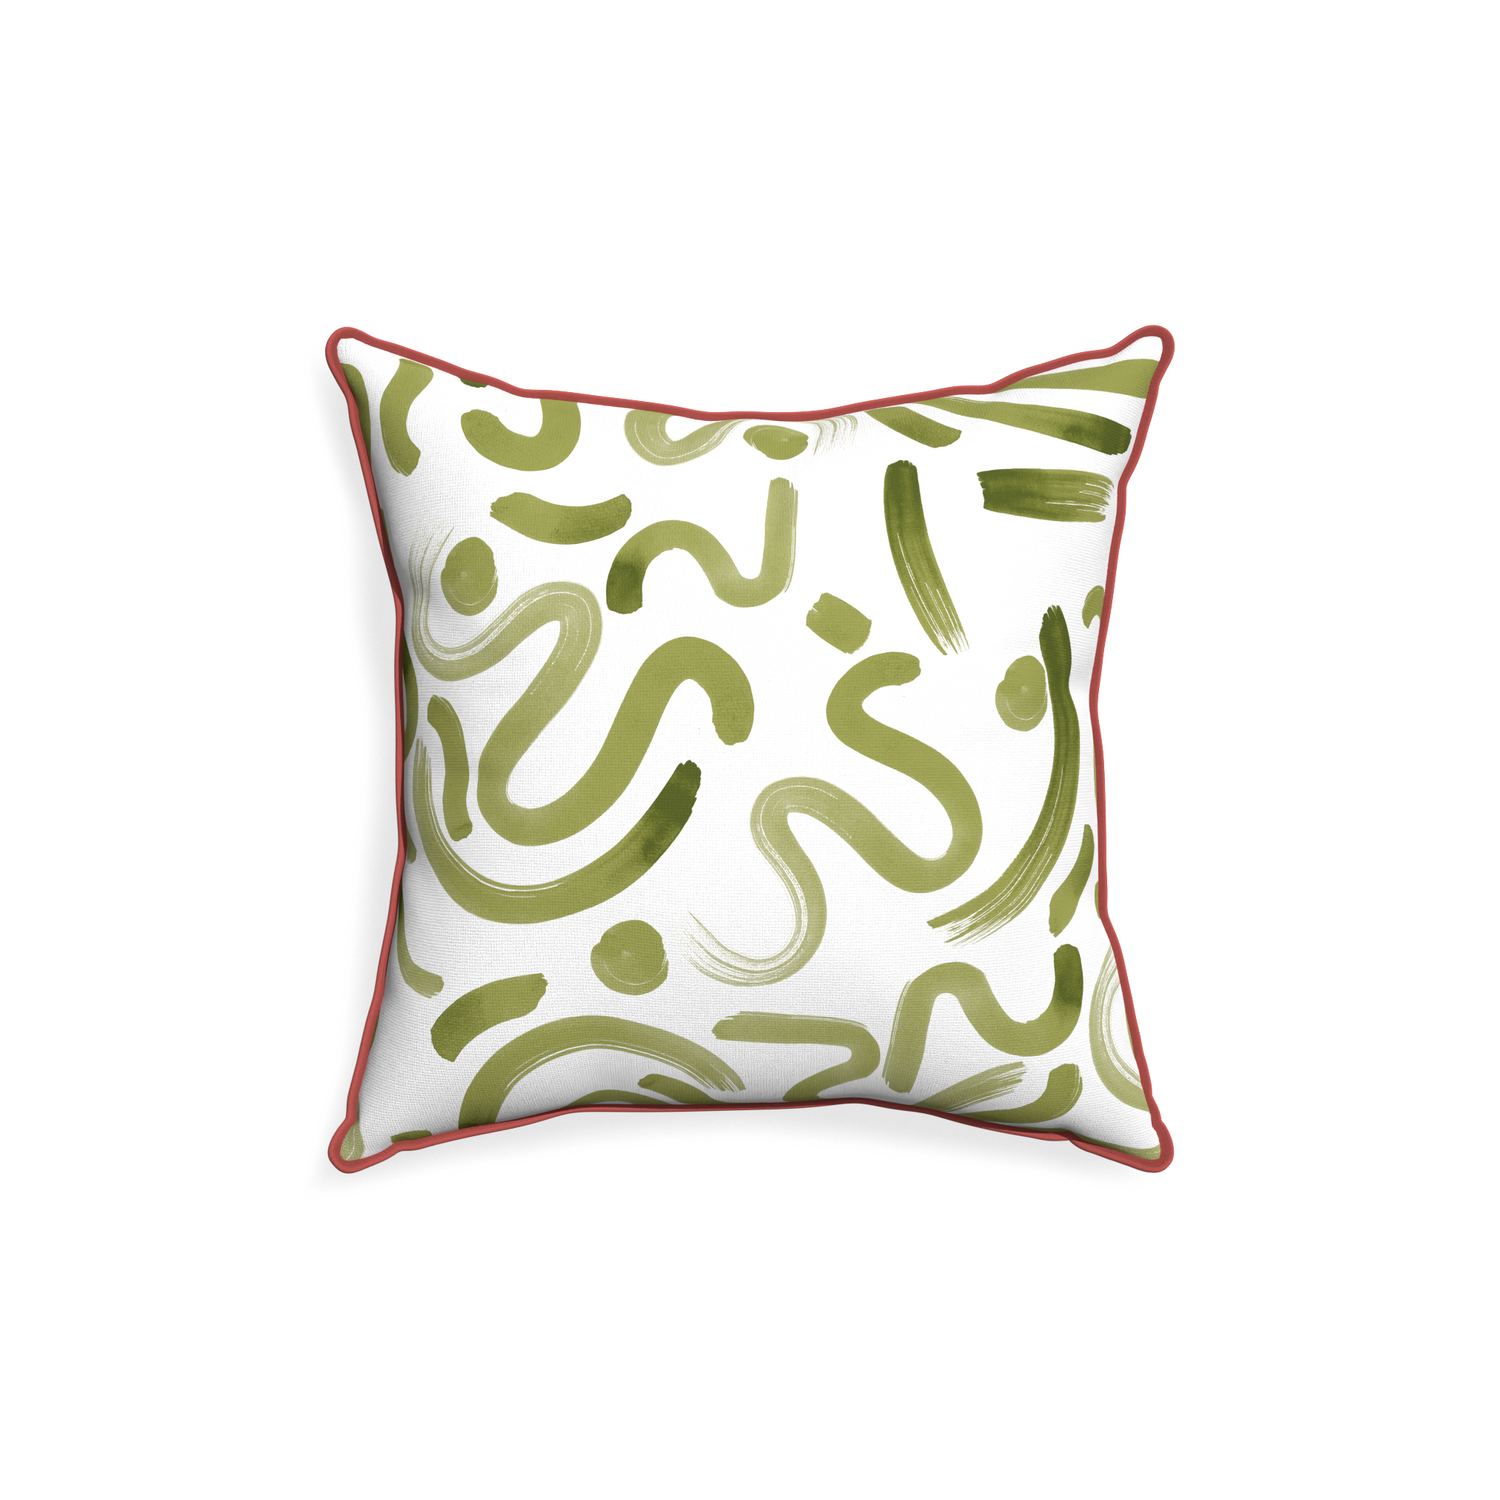 18-square hockney moss custom pillow with c piping on white background